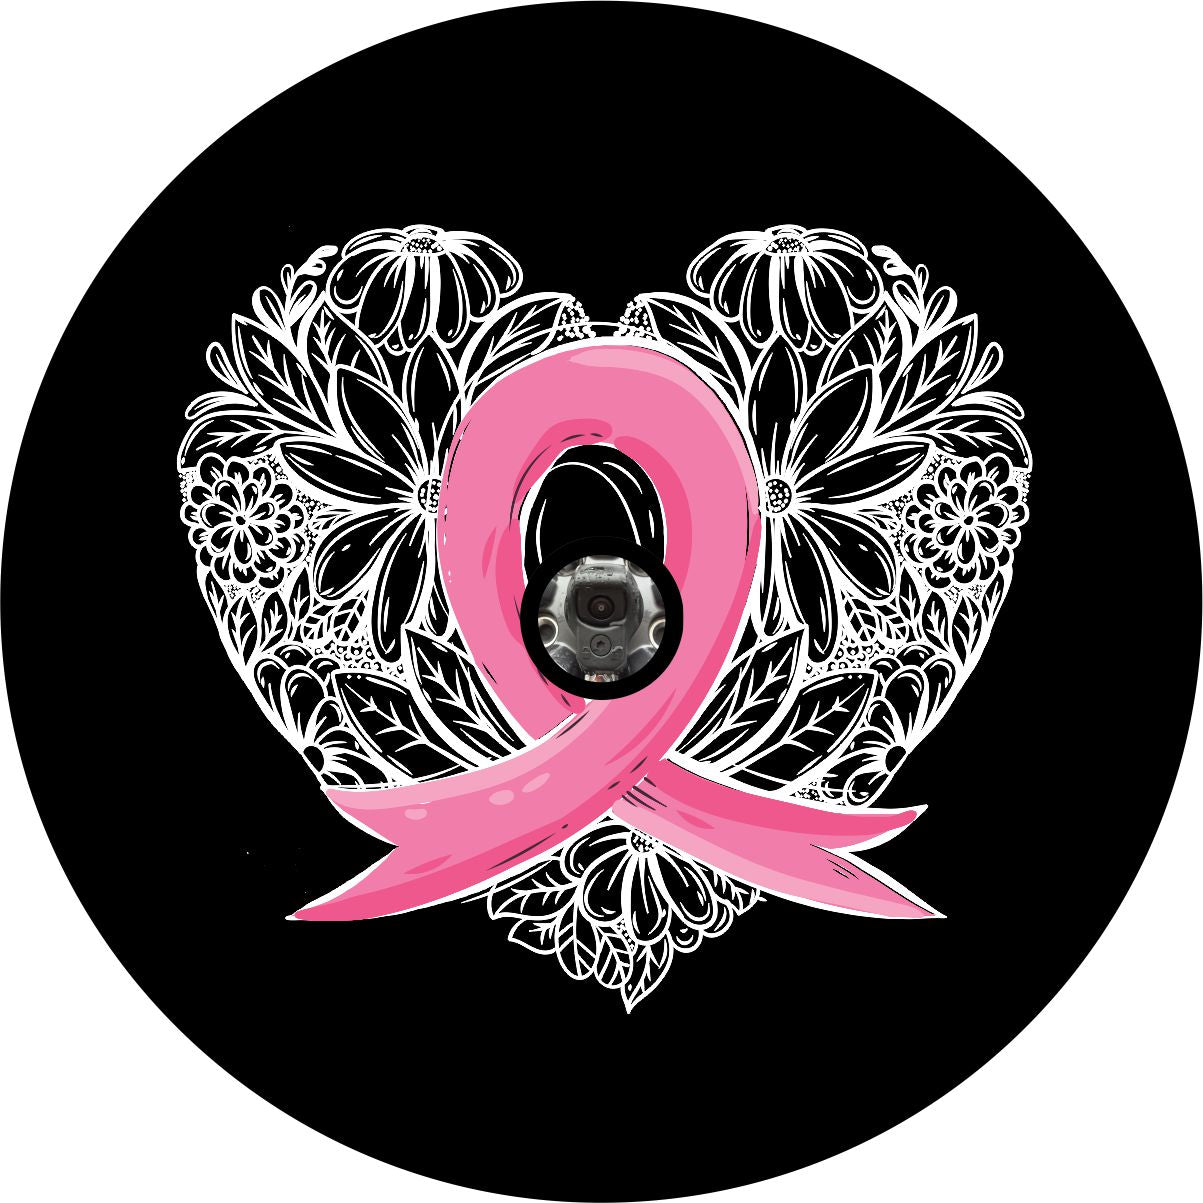 Spare tire cover design on black vinyl of a pink breast cancer ribbon inside a beautiful hand drawn heart of florals. Spare tire cover design with camera hole for Jeep, Bronco, RV, camper, trailers, and more